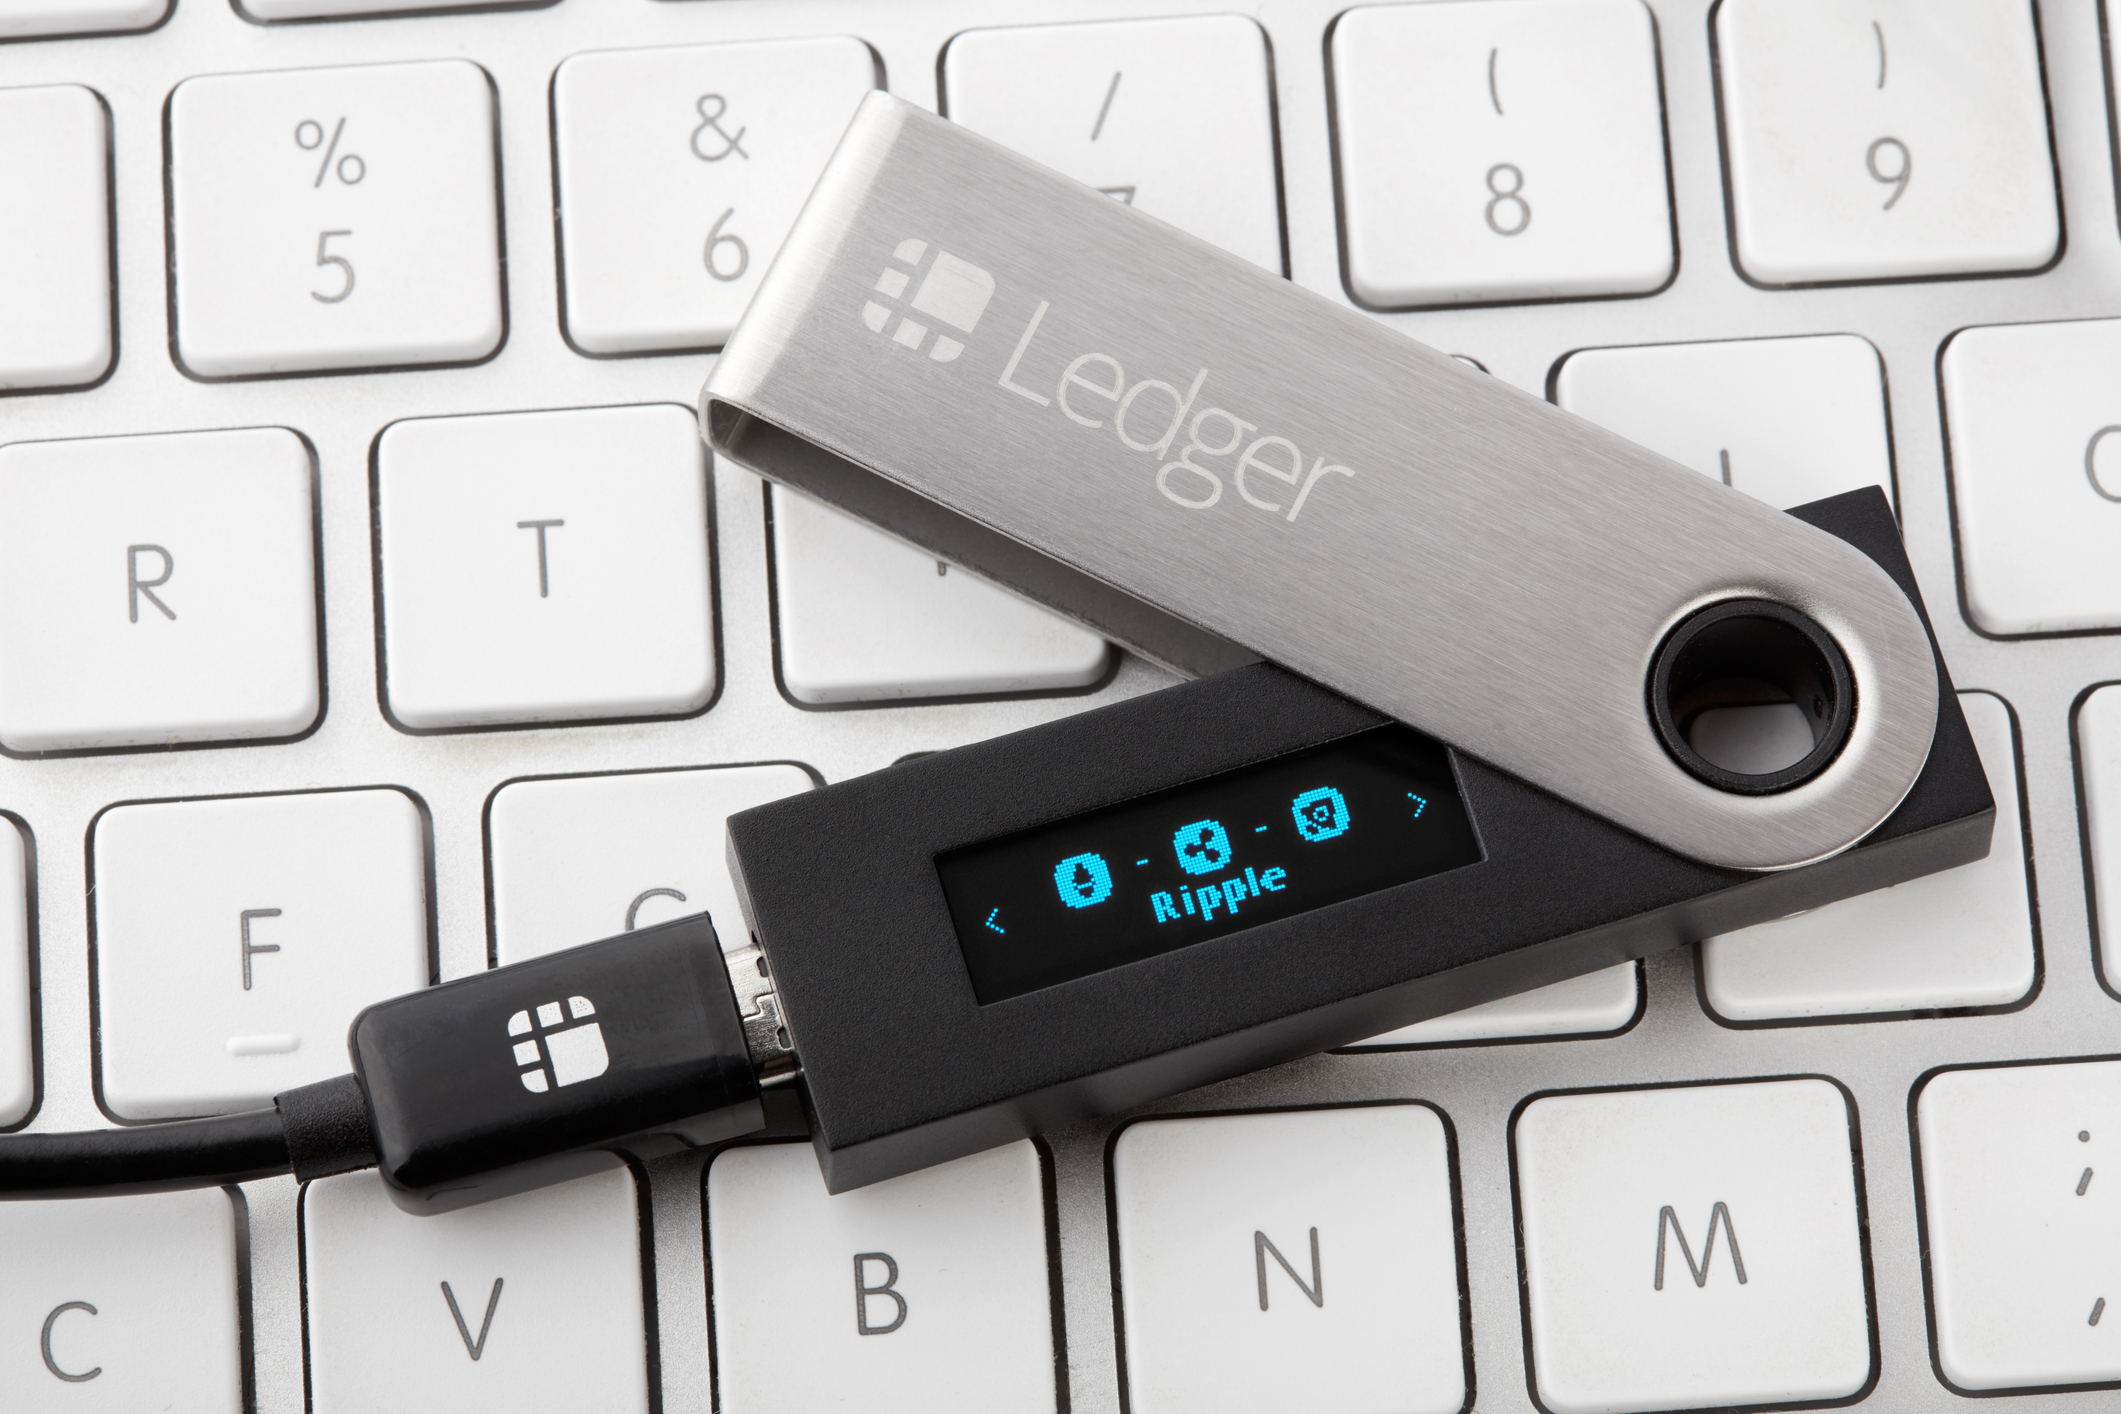 Milan, Italy - February 2, 2018: Ledger hardware wallet for cryptocurrency with Ripple coin selection in Milan